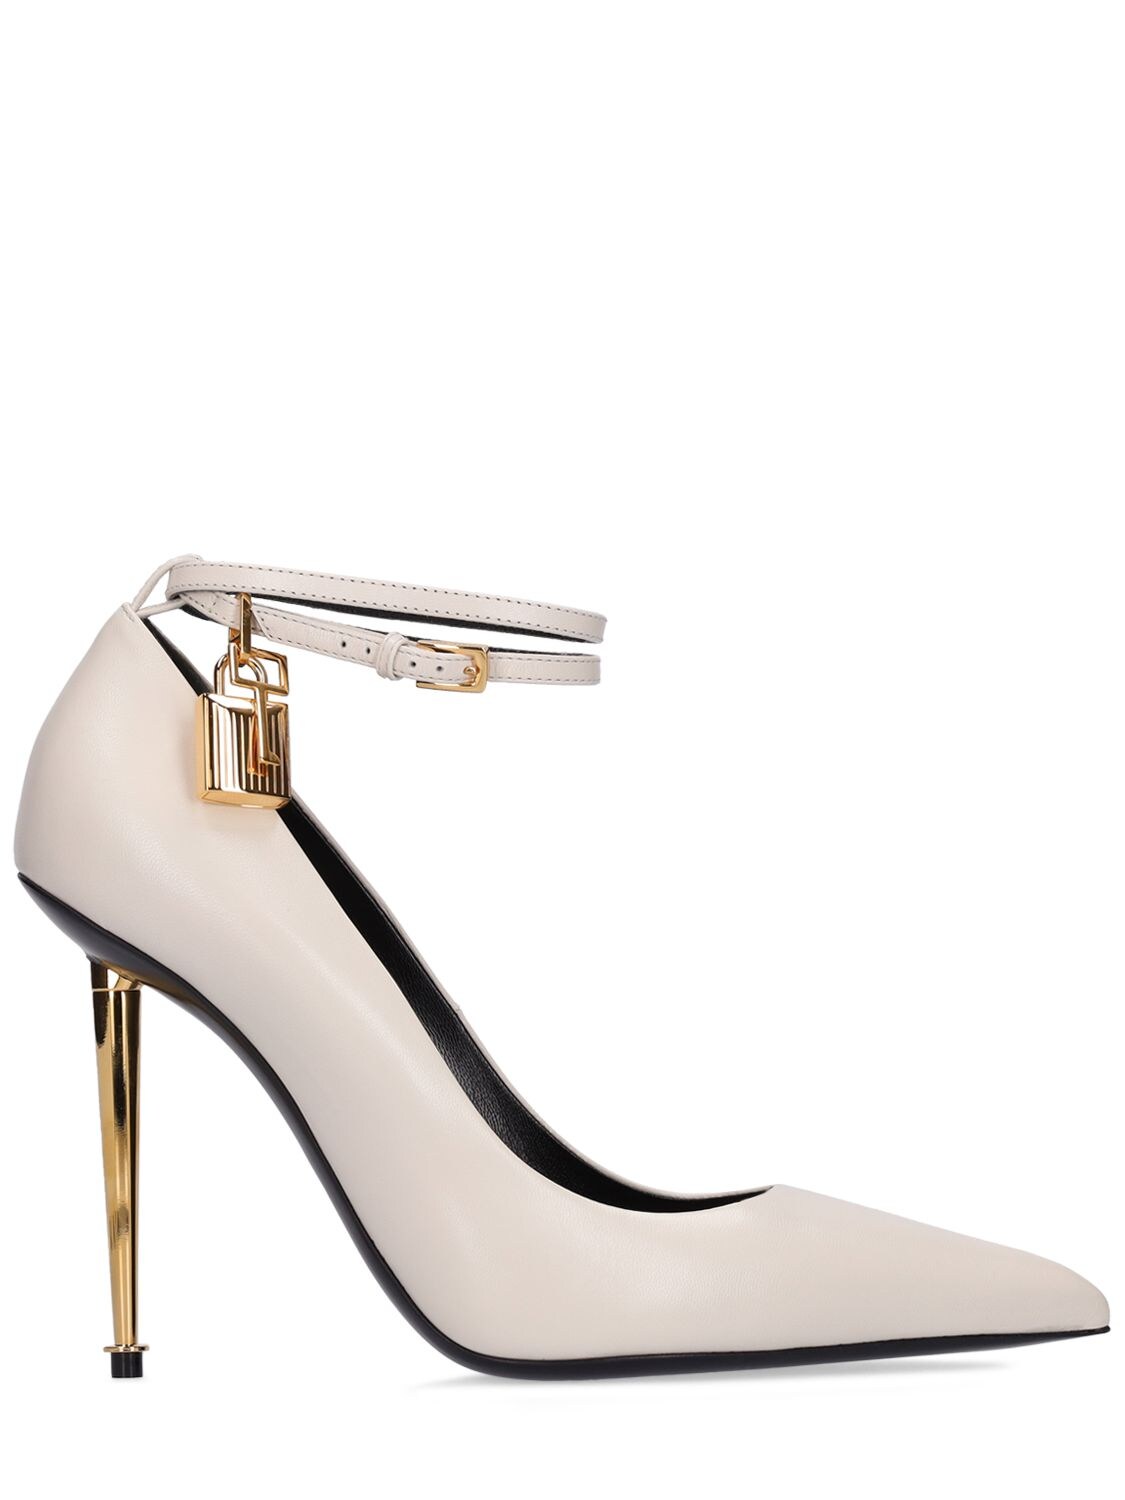 TOM FORD 105MM PADLOCK LEATHER PUMPS